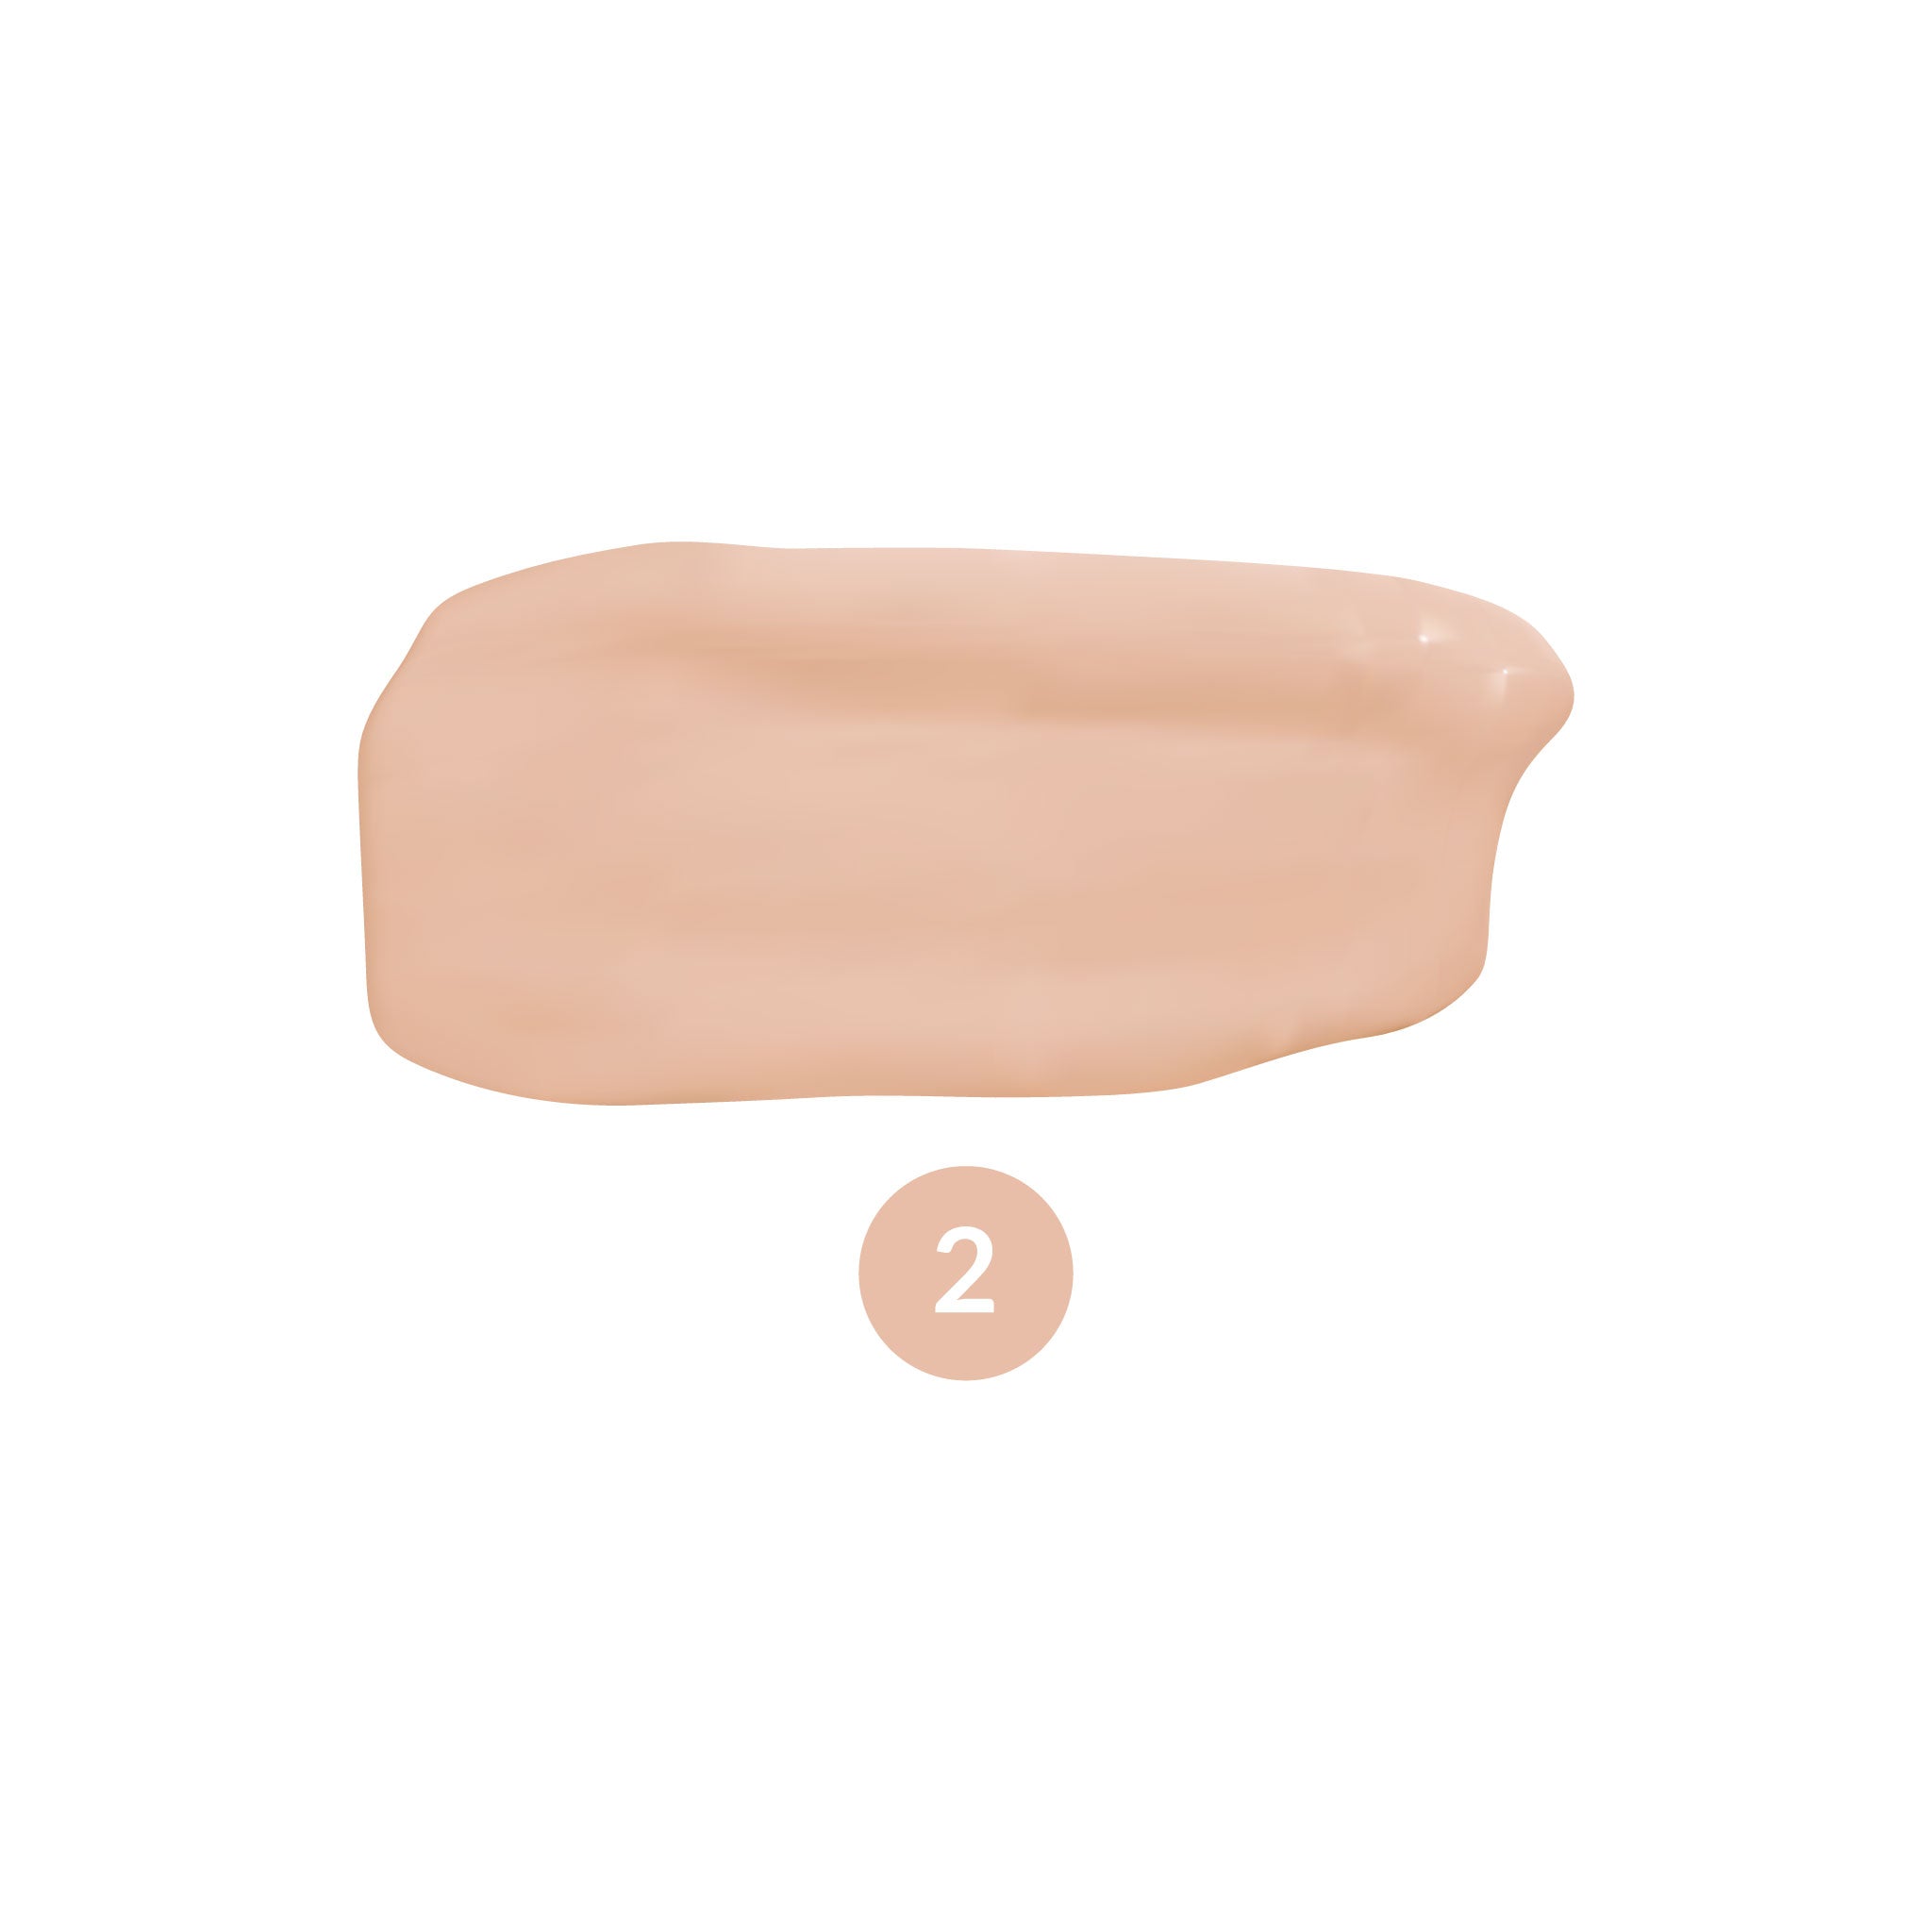 withSimplicity Liquid Foundation Swatch Shade 2